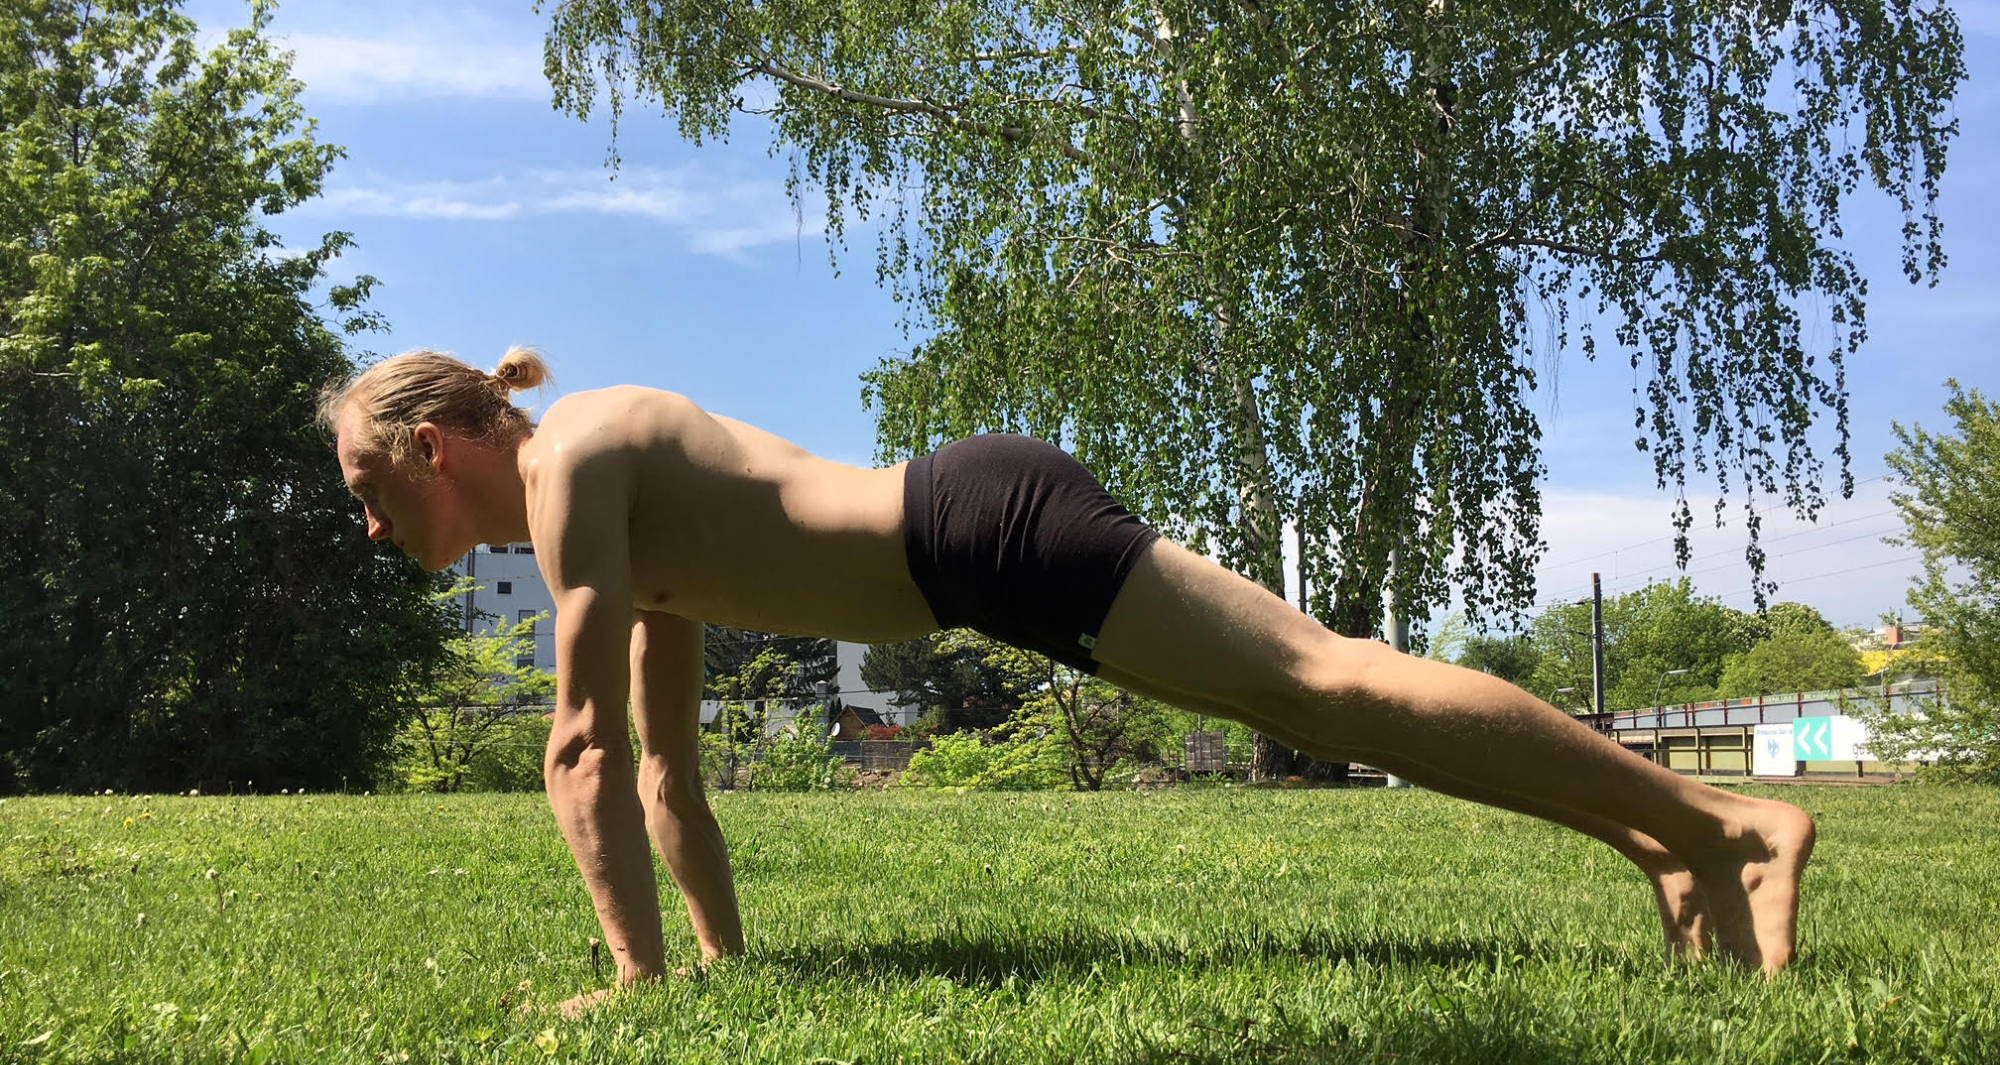 Man planking in a park in a pair of men’s trunks.